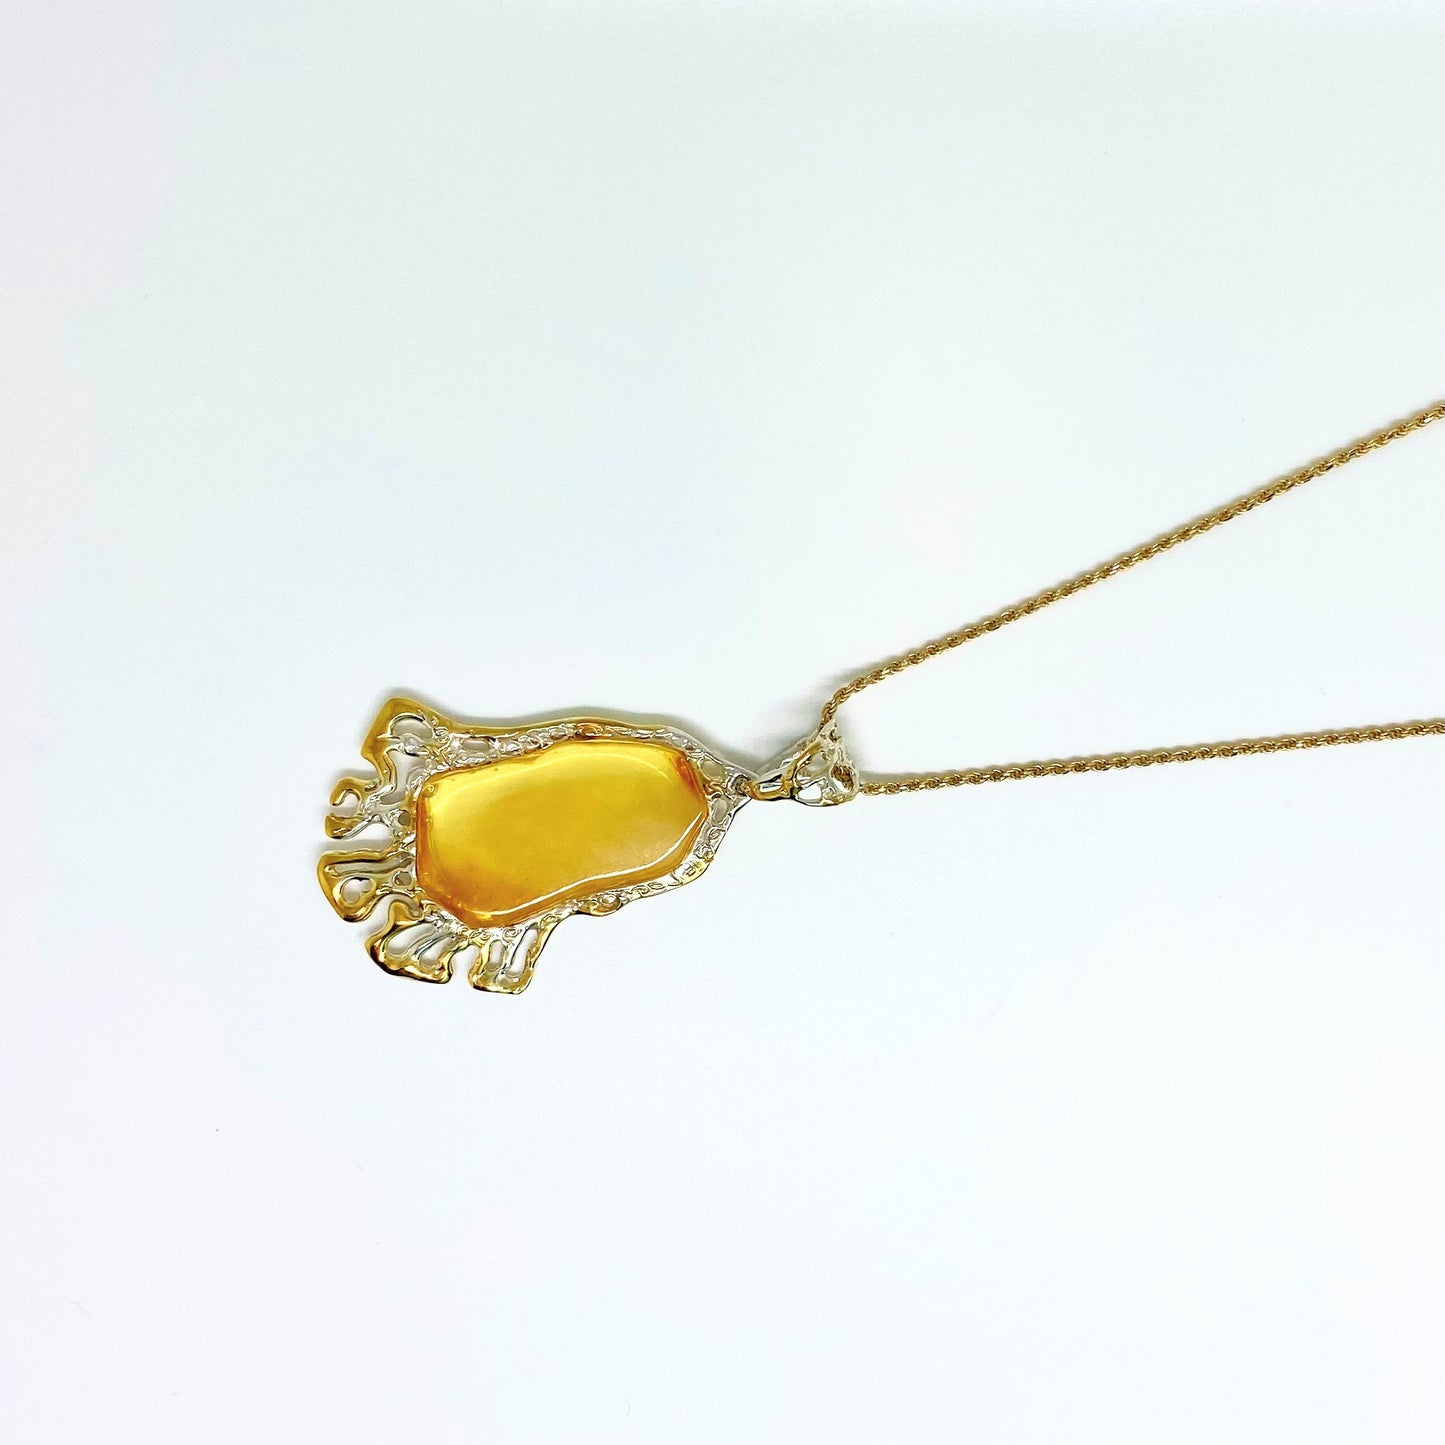 Handmade One of a Kind Butterscotch  Baltic Amber Pendant Necklace